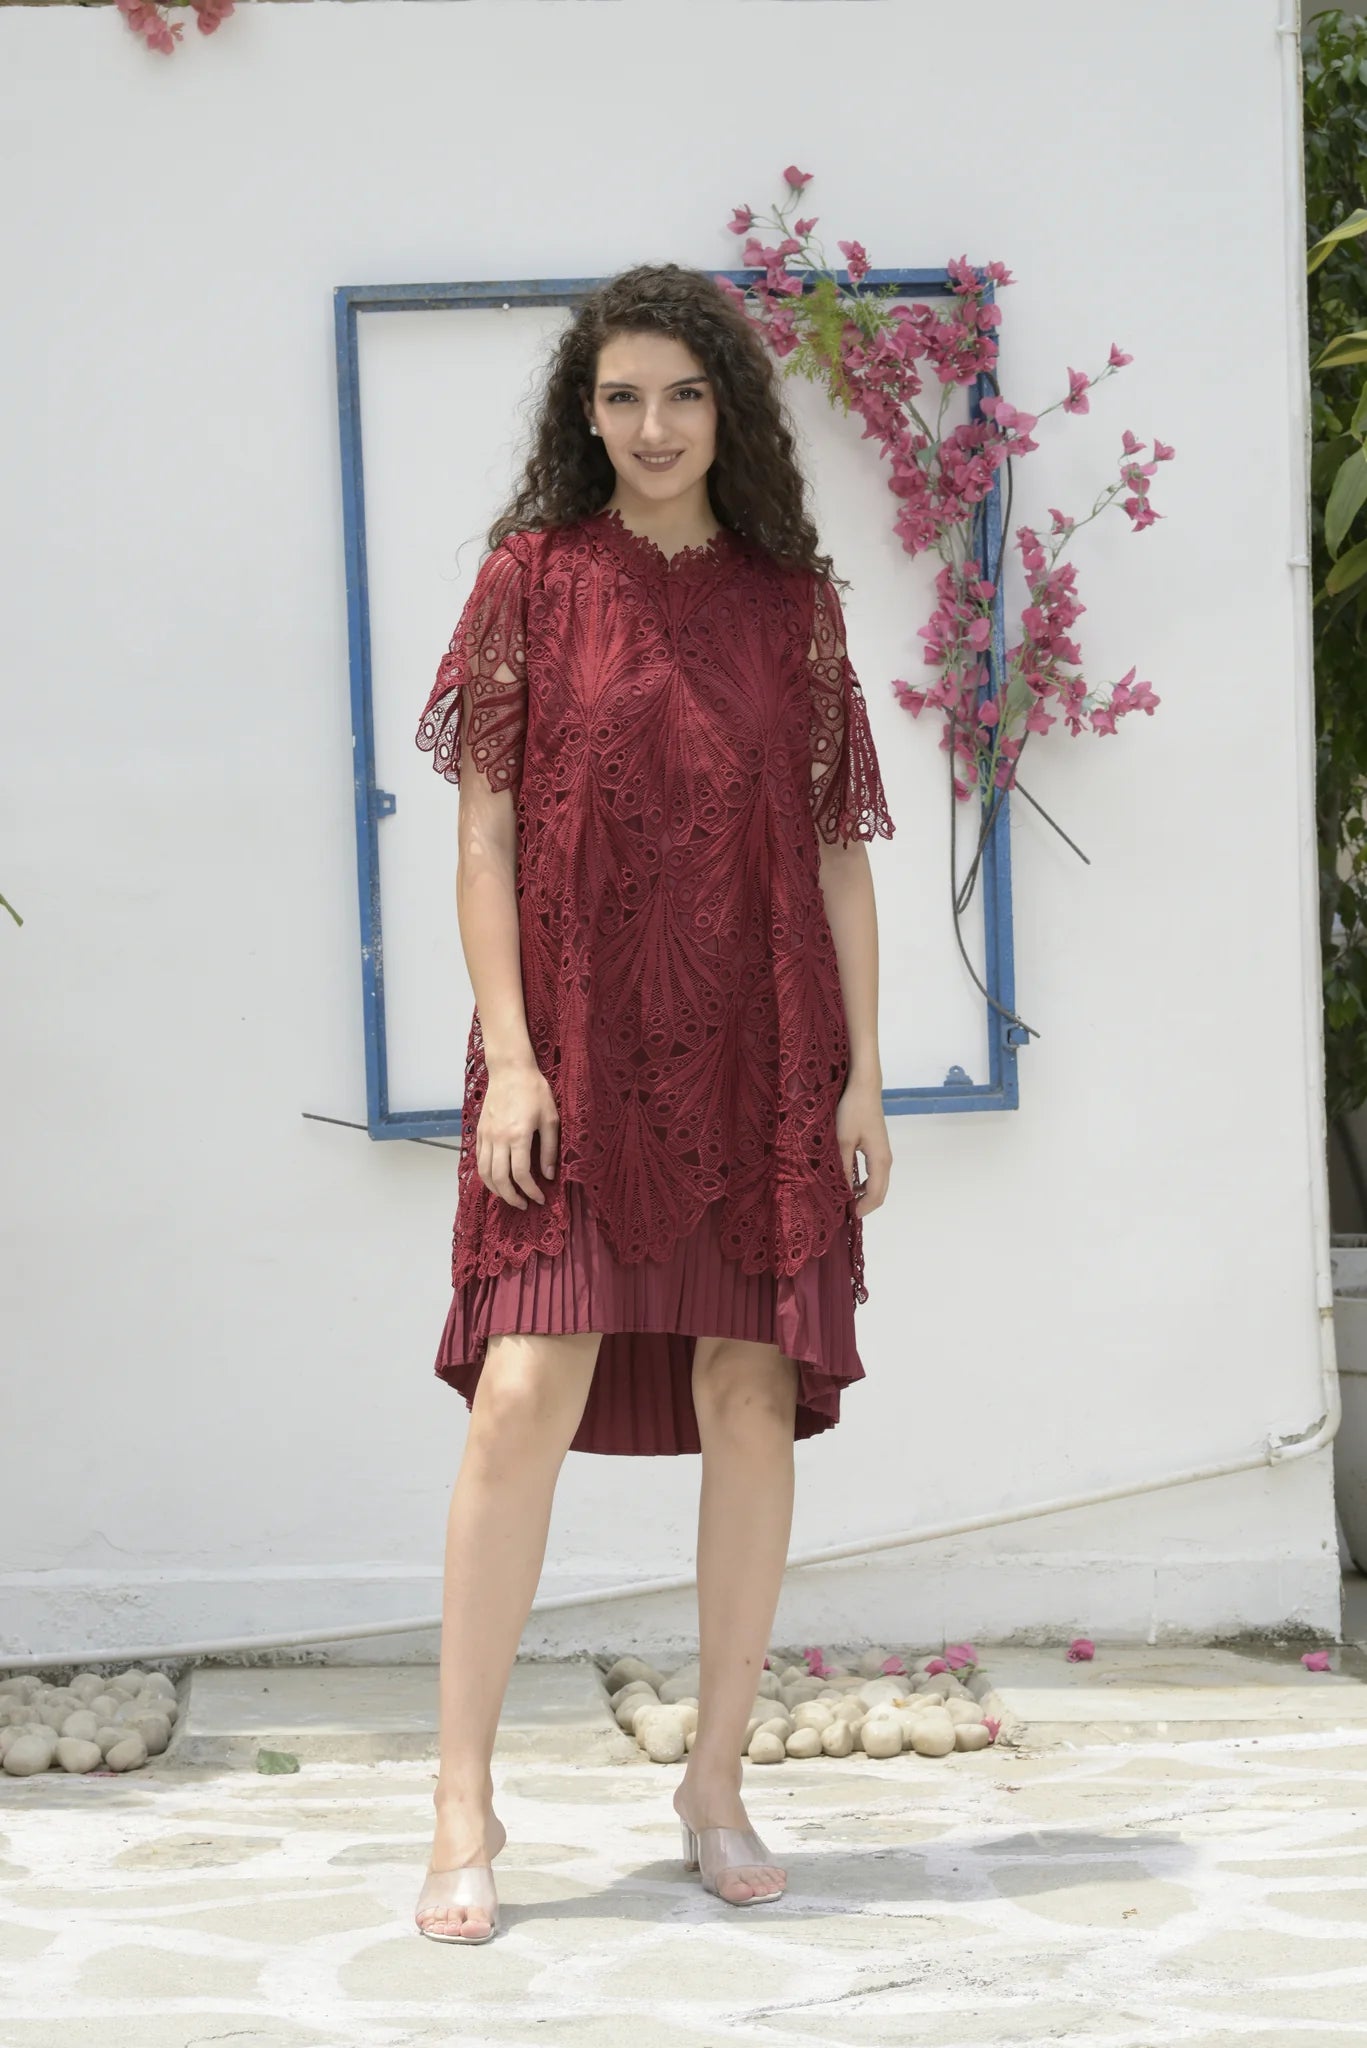 Image of Dazzle at your special event in the sensational MYRA Mesh Daylily Lace Dress! Crafted with exquisite lace detailing, this maroon stunner is guaranteed to make heads turn. With lightweight comfort and an elegant silhouette, you'll love the luxurious look and feel. So go ahead, make your grand entrance!  From savoirfashions.com